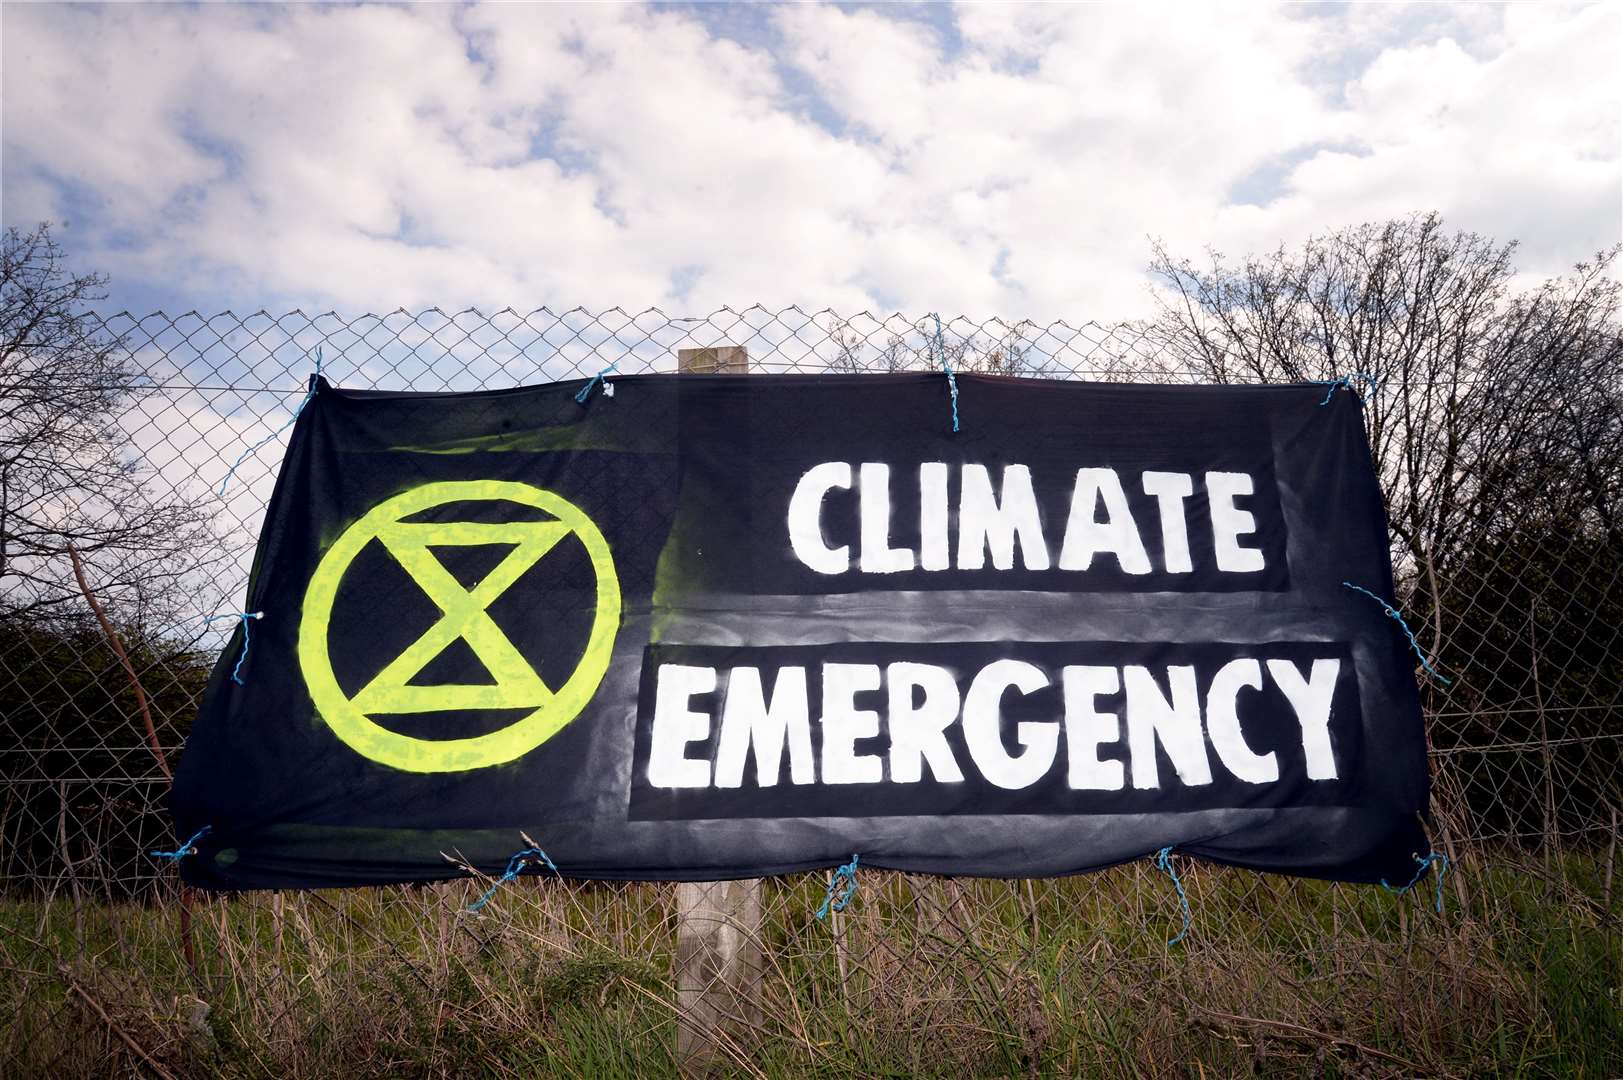 An Extinction Rebellion banner as Friends of the Earth Scotland criticises Scottish councils who have declared a climate emergency yet have pension investments in coal, oil and gas firms.